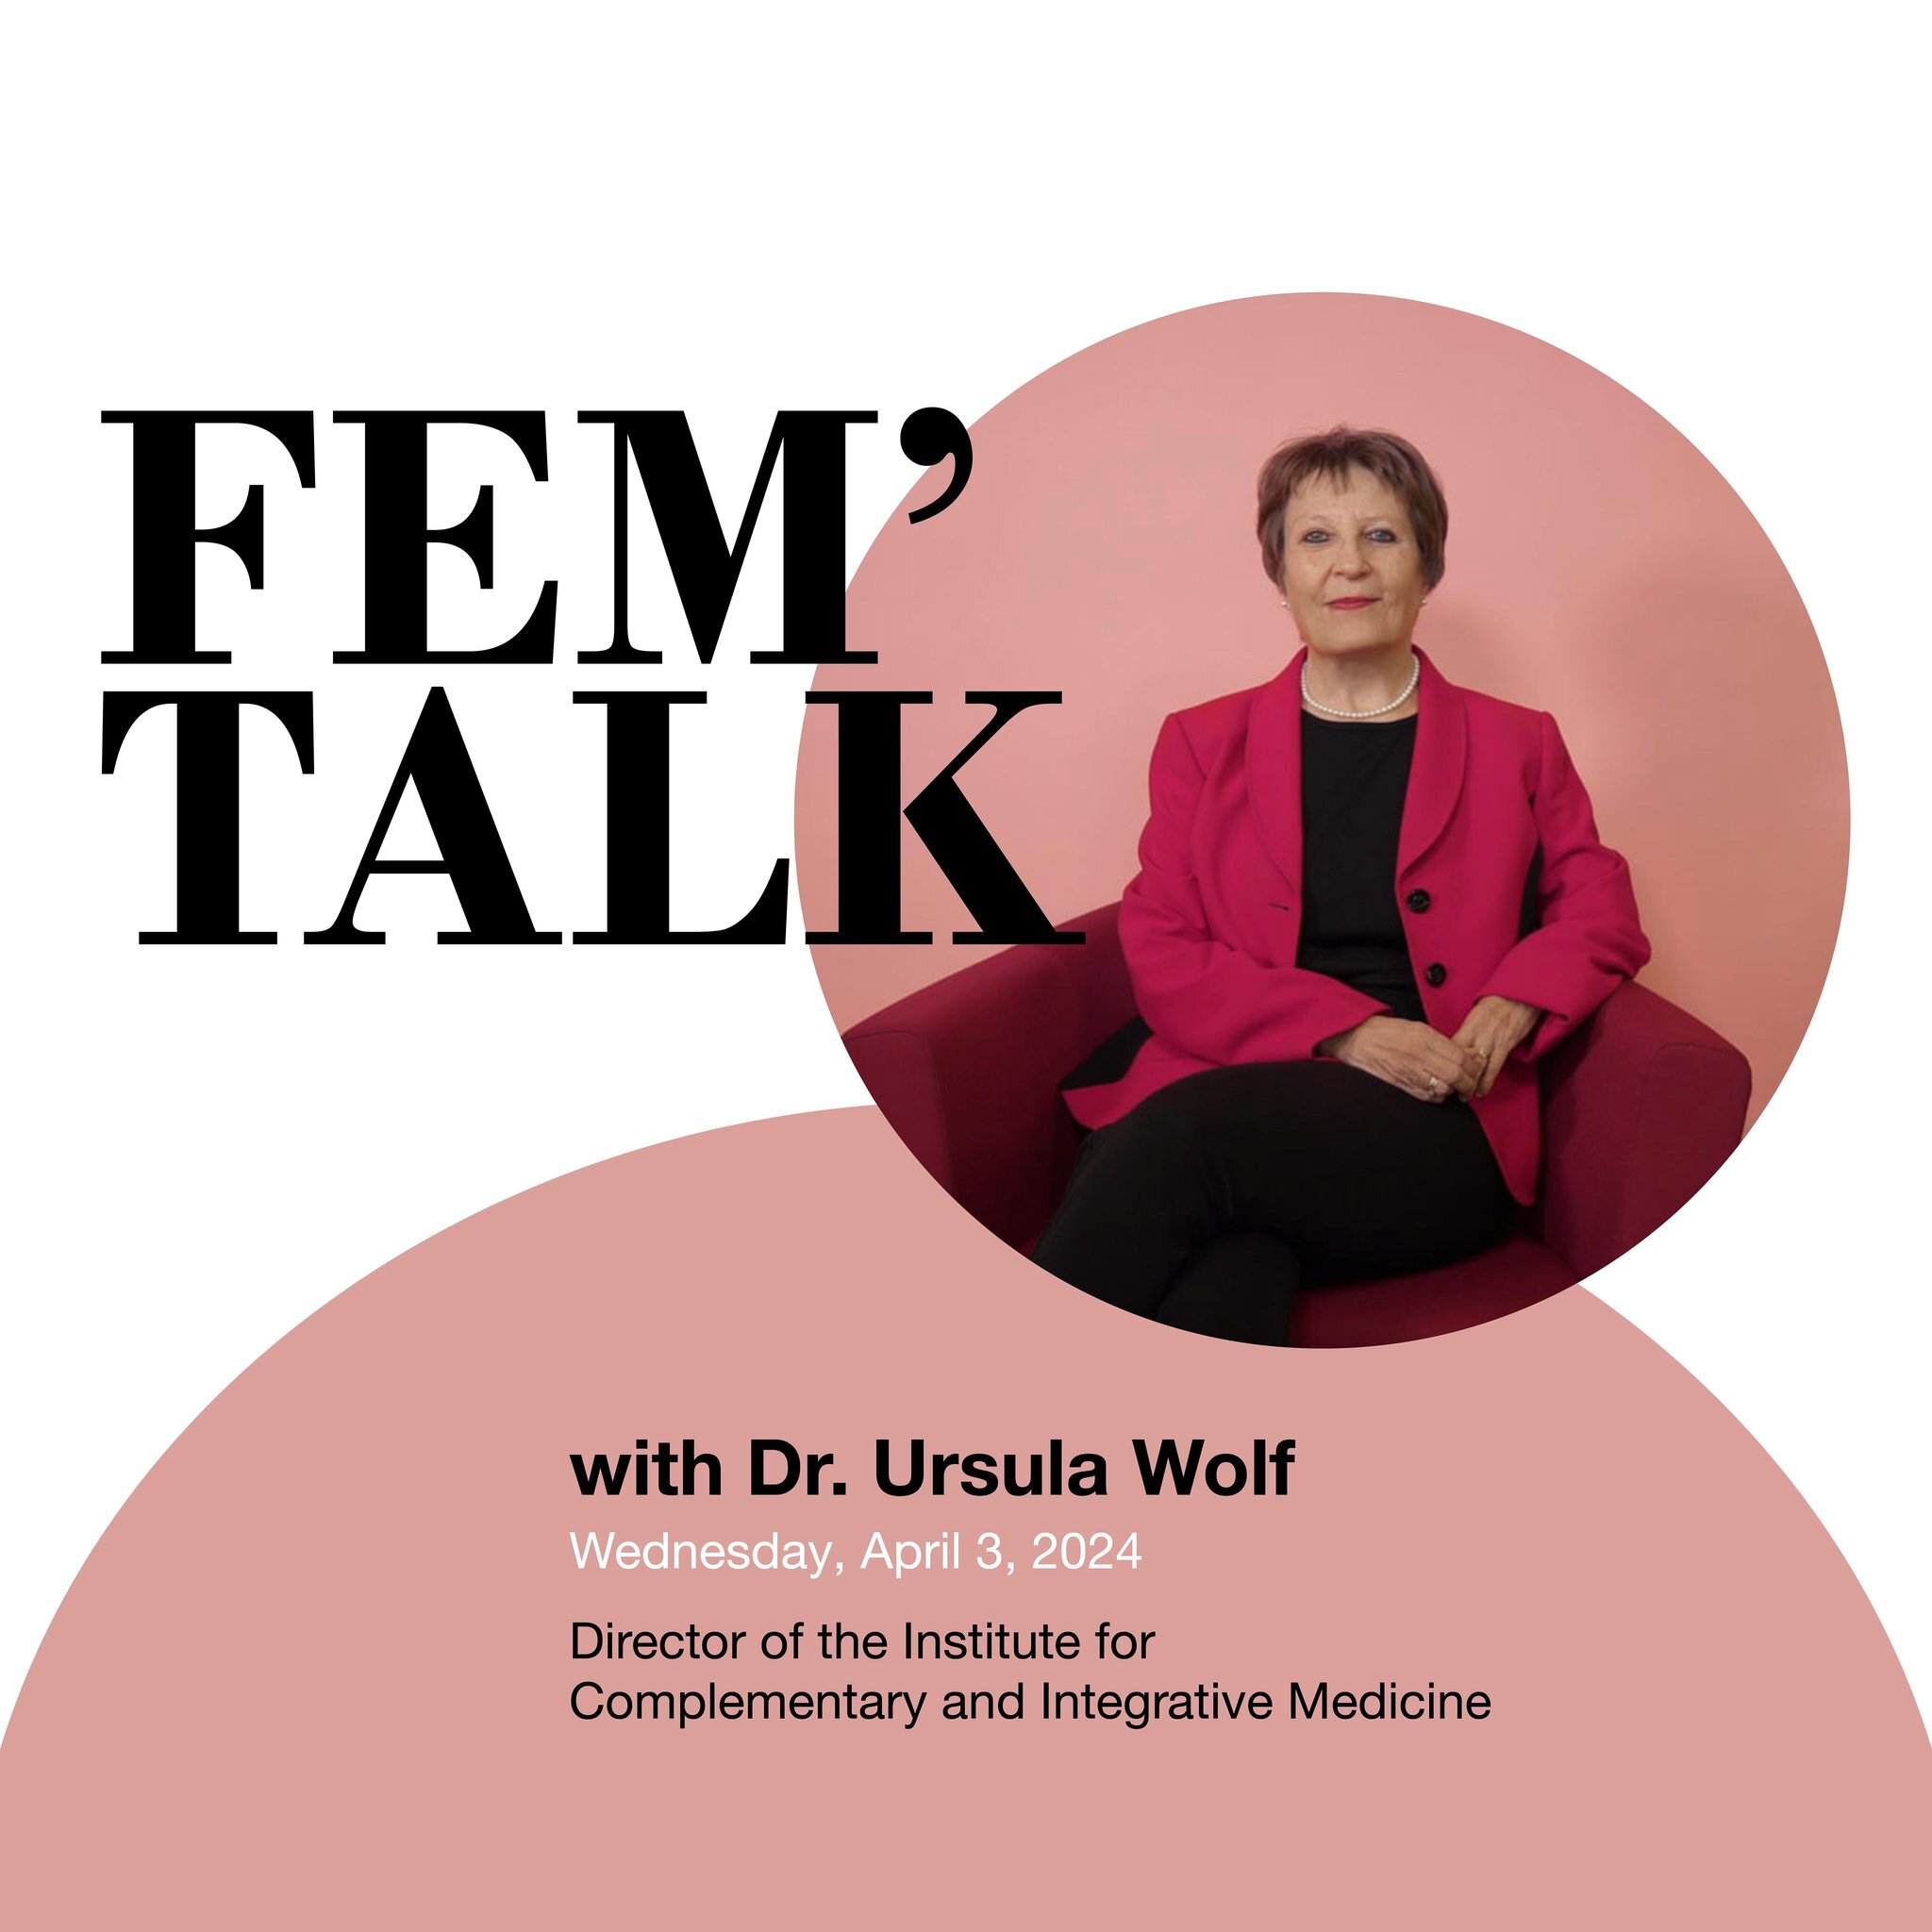 &laquo;Be authentic because that is what your counterparts sense, and that will build trust.&raquo;

✨✨FEM&rsquo;TALK x Ursula Wolf ✨✨

🌟 An inspiring conversation with Dr. Ursula Wolf - Director of the Institute for Complementary and Integrative Me